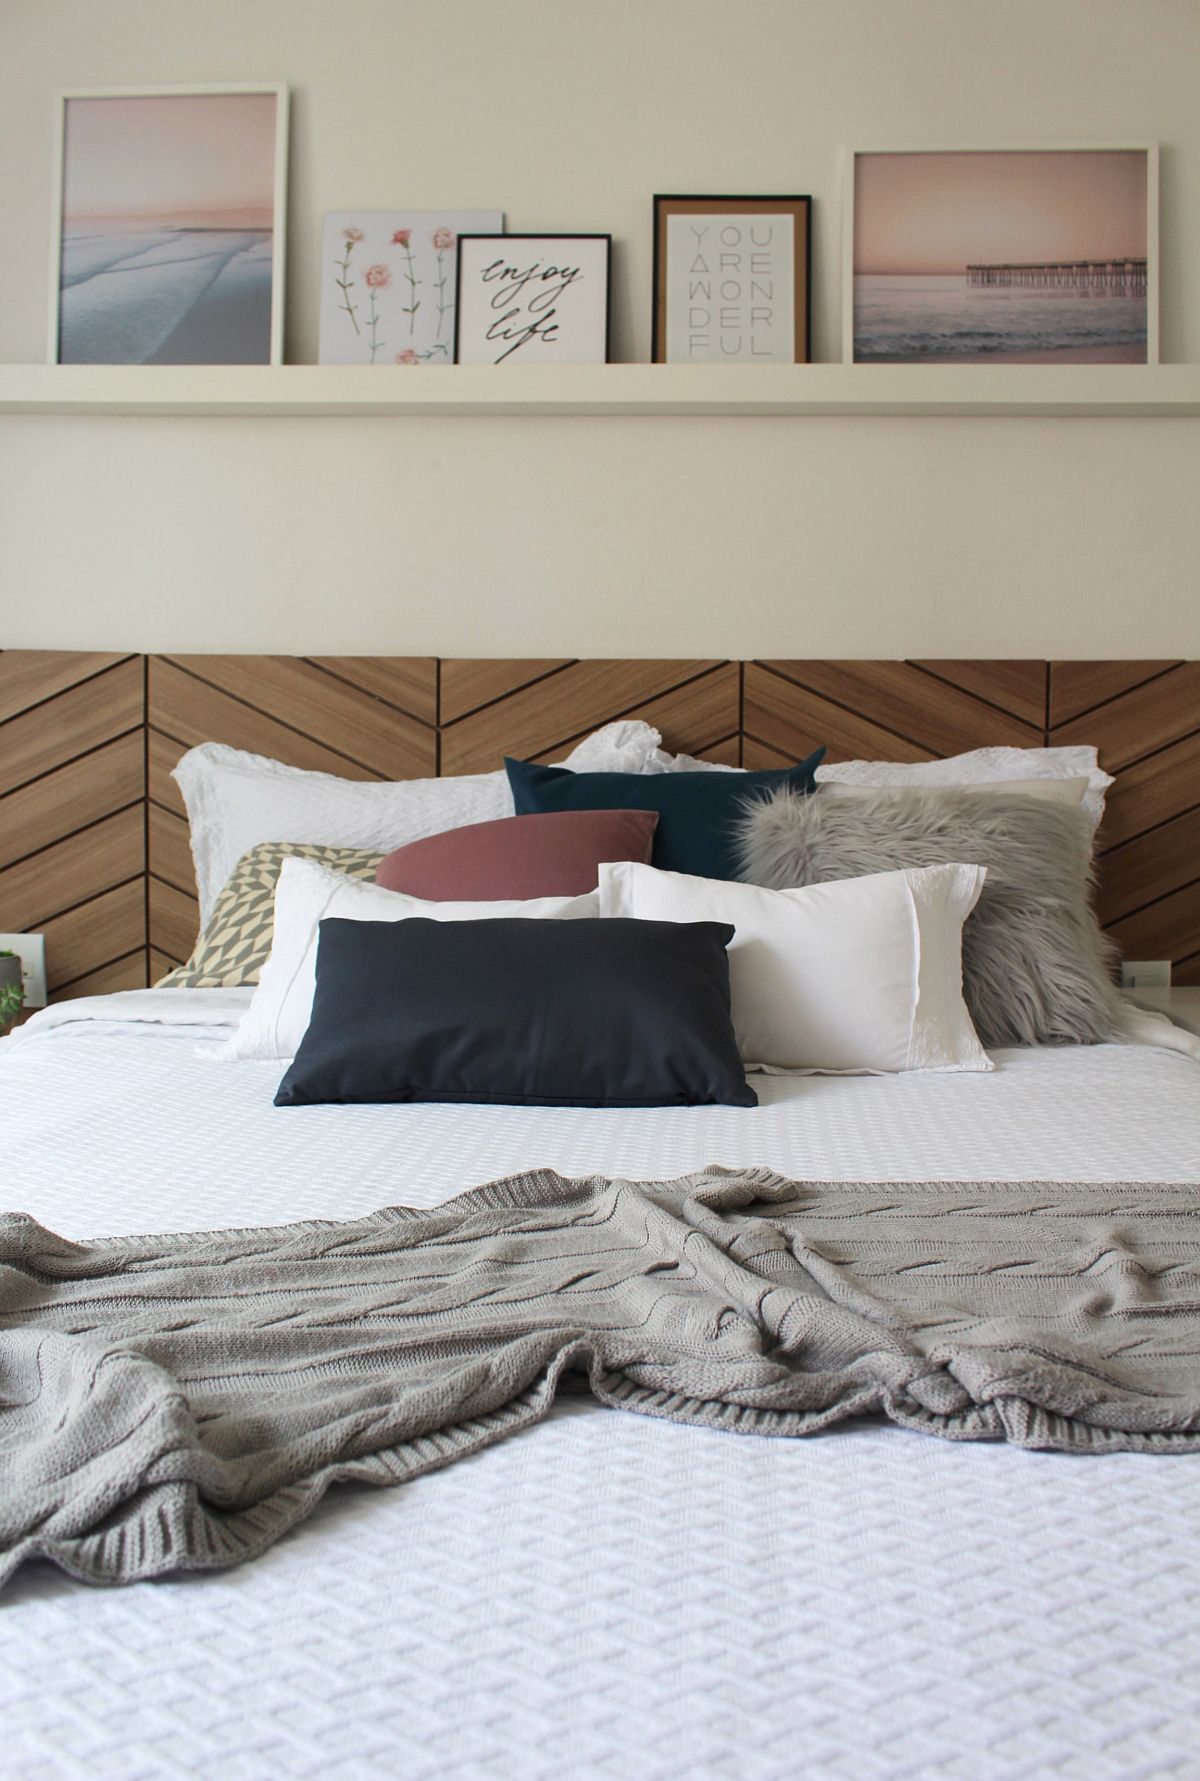 Slim-space-above-the-headboard-decorated-in-an-understated-fashion-77737